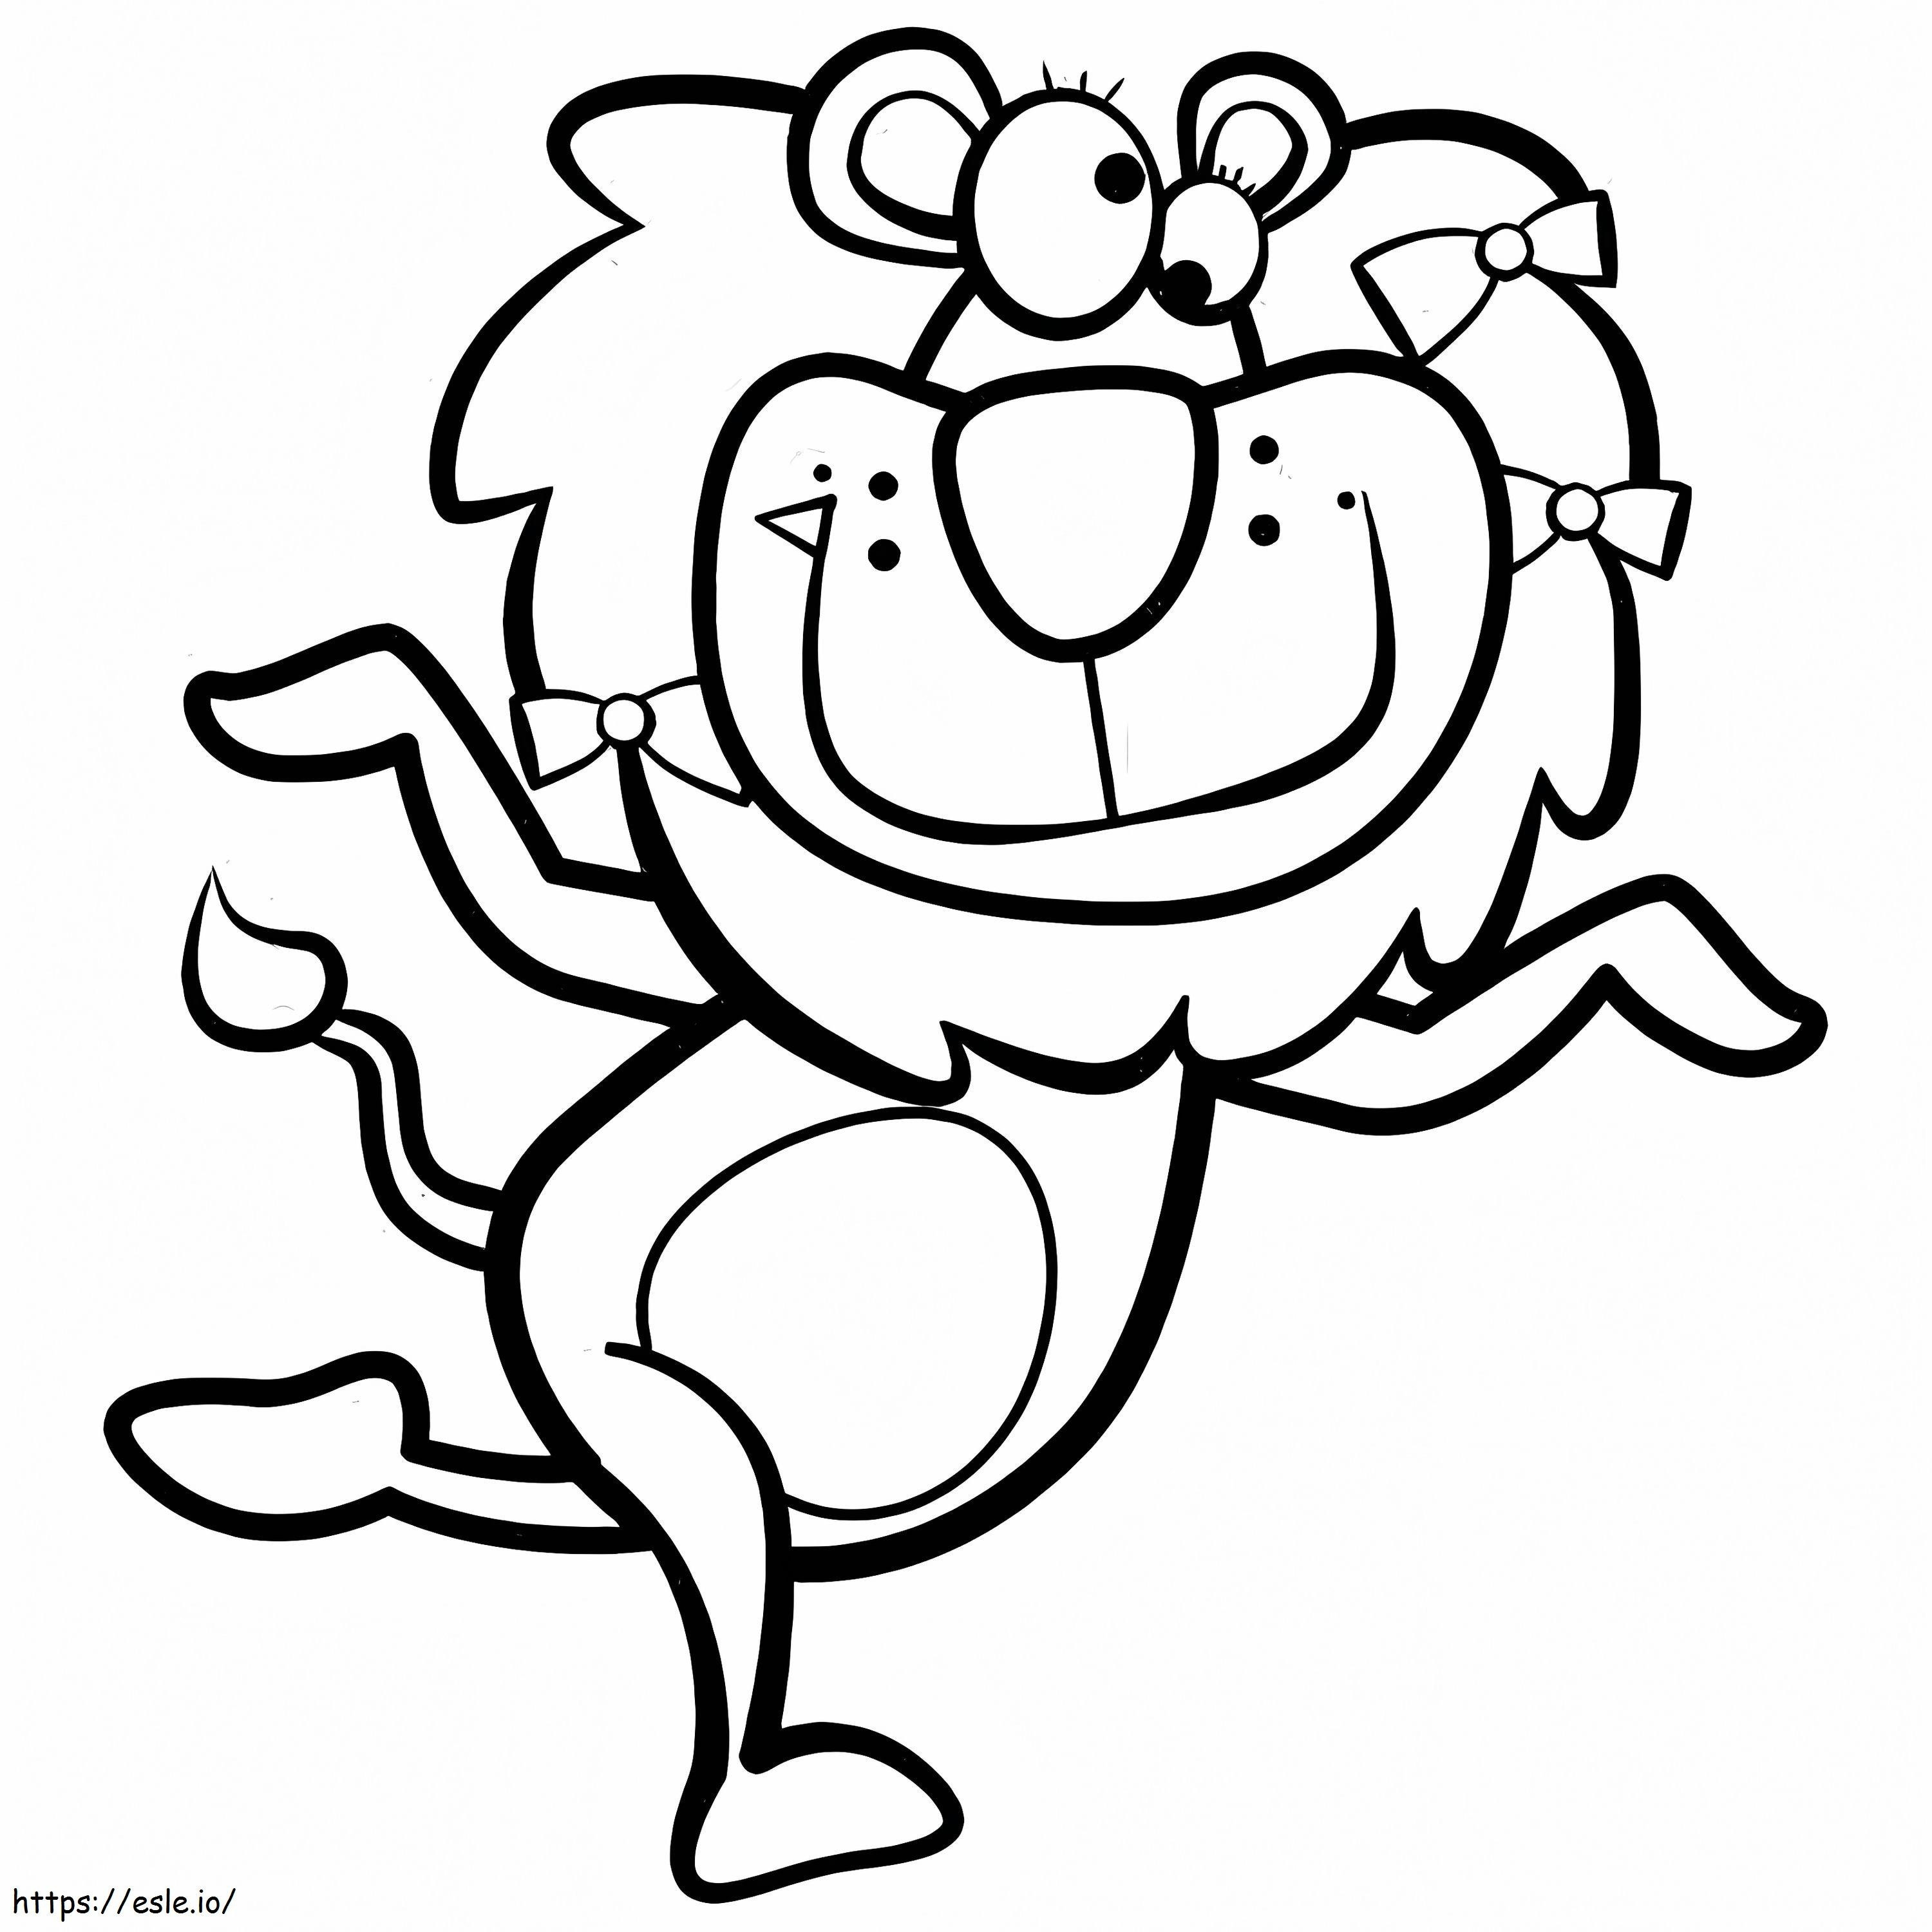 Lion Is Crazy coloring page